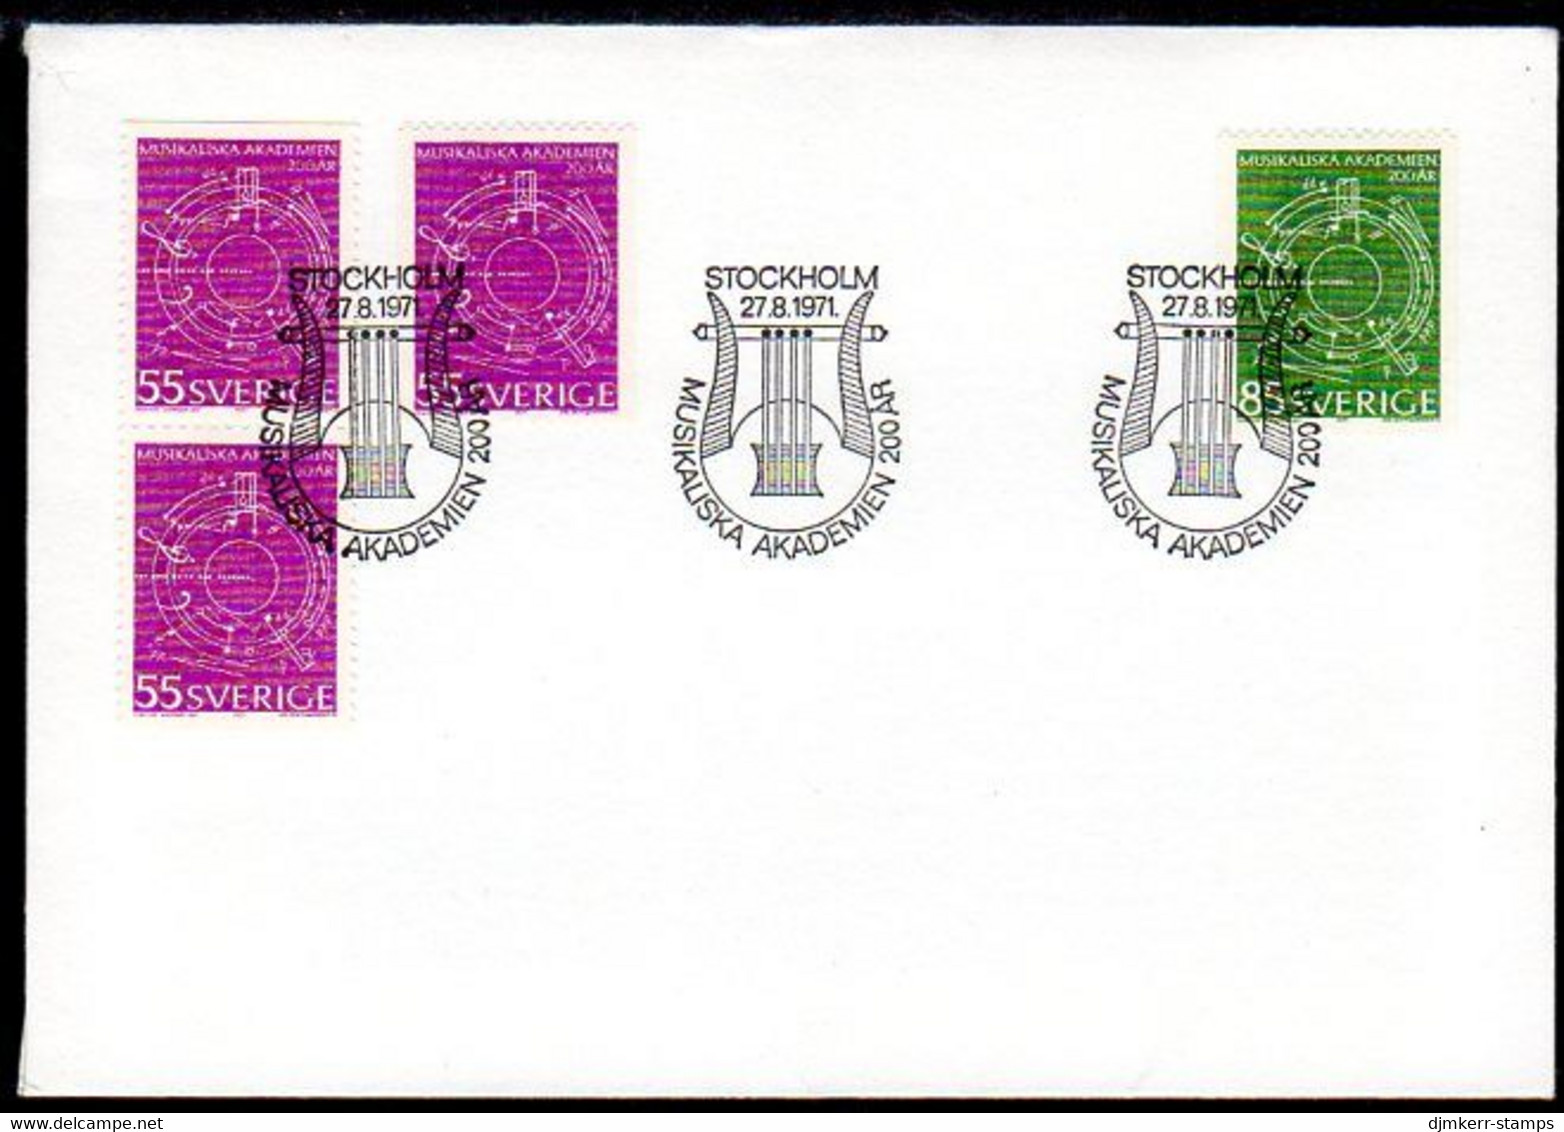 SWEDEN 1971 Royal Academy Of Music FDC.  Michel 713-14 - FDC